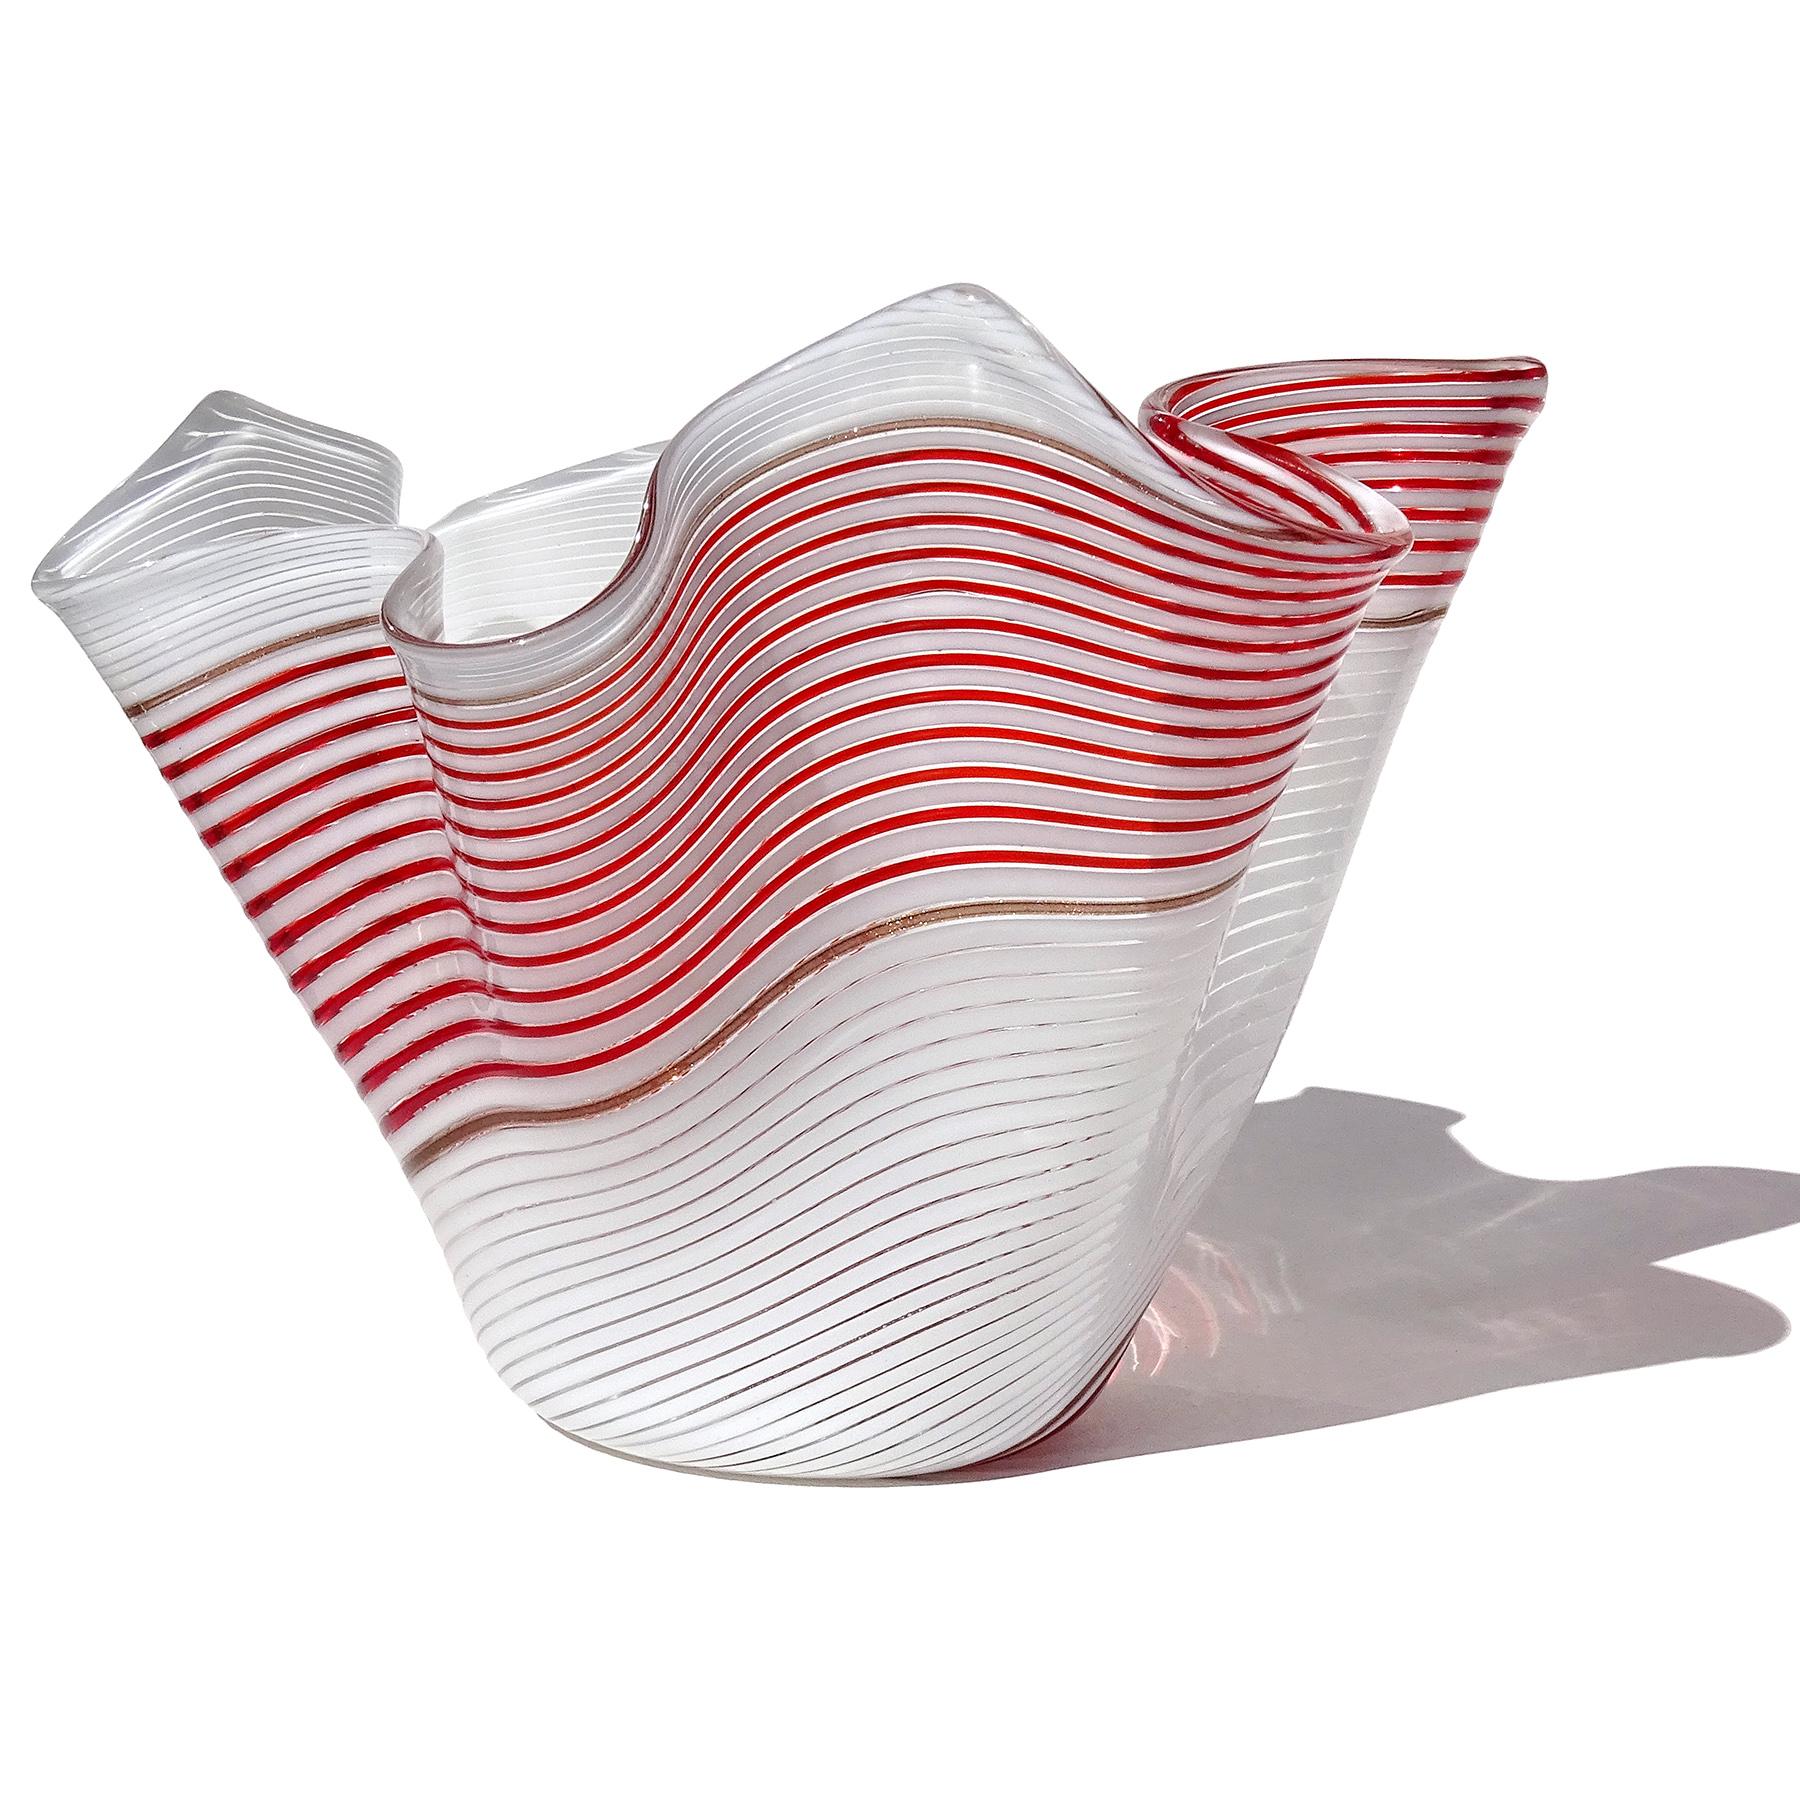 Dino Martens Murano 1950s Red White Ribbons Italian Art Glass Fazzoletto Vase In Good Condition For Sale In Kissimmee, FL